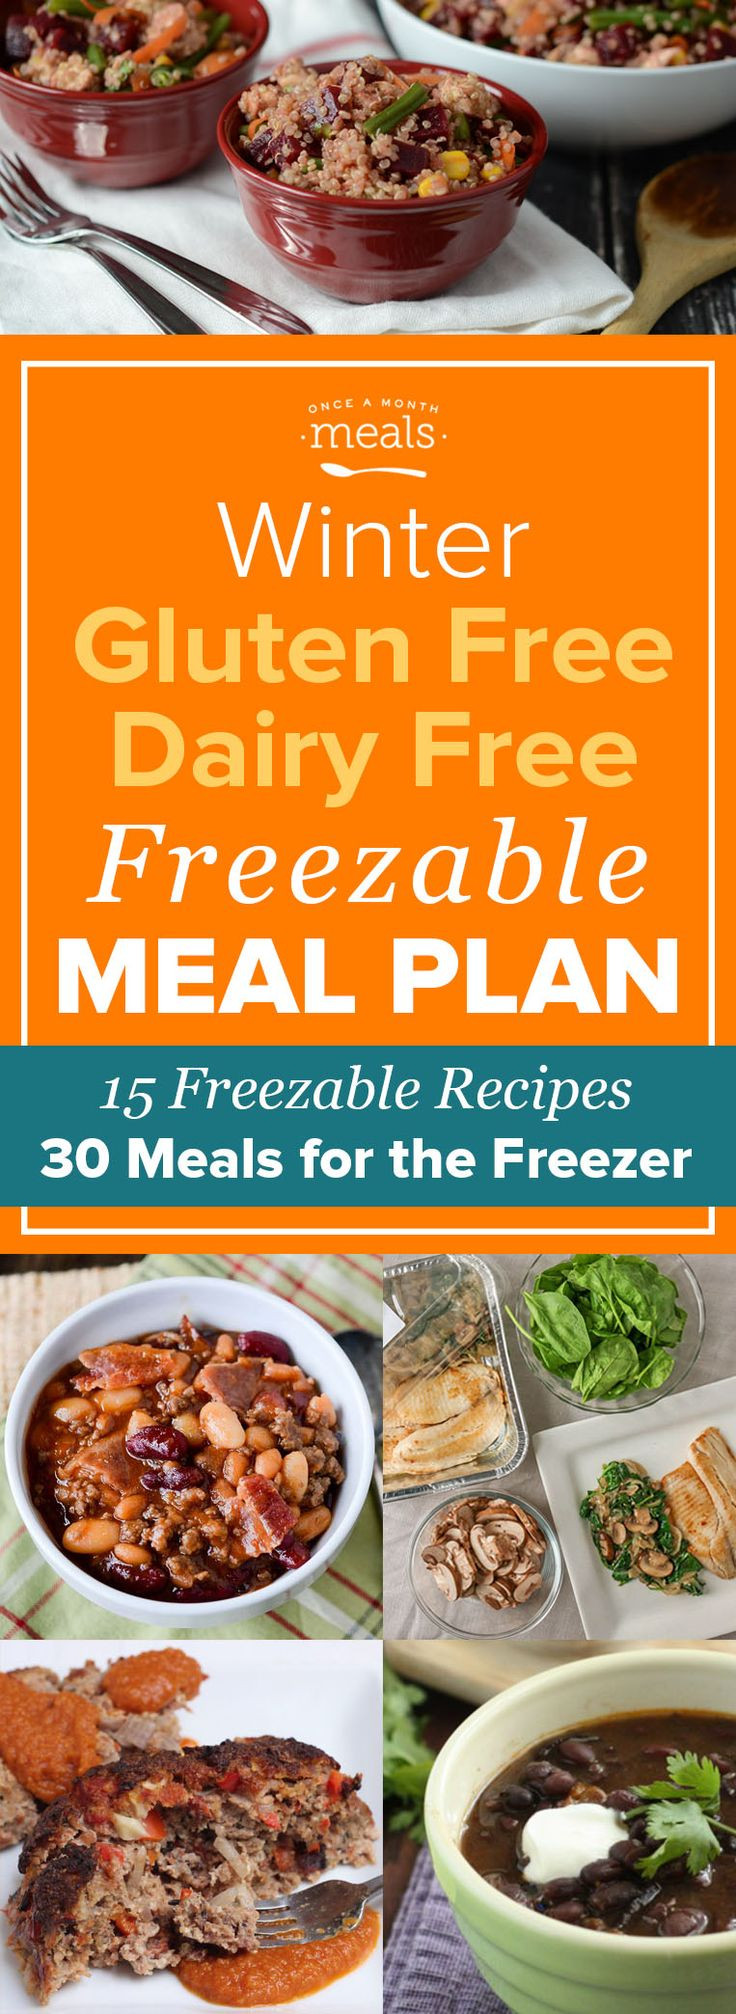 Gluten Free Dairy Free Vegetarian Recipes For Dinner
 Best 25 Freezable recipes ideas on Pinterest